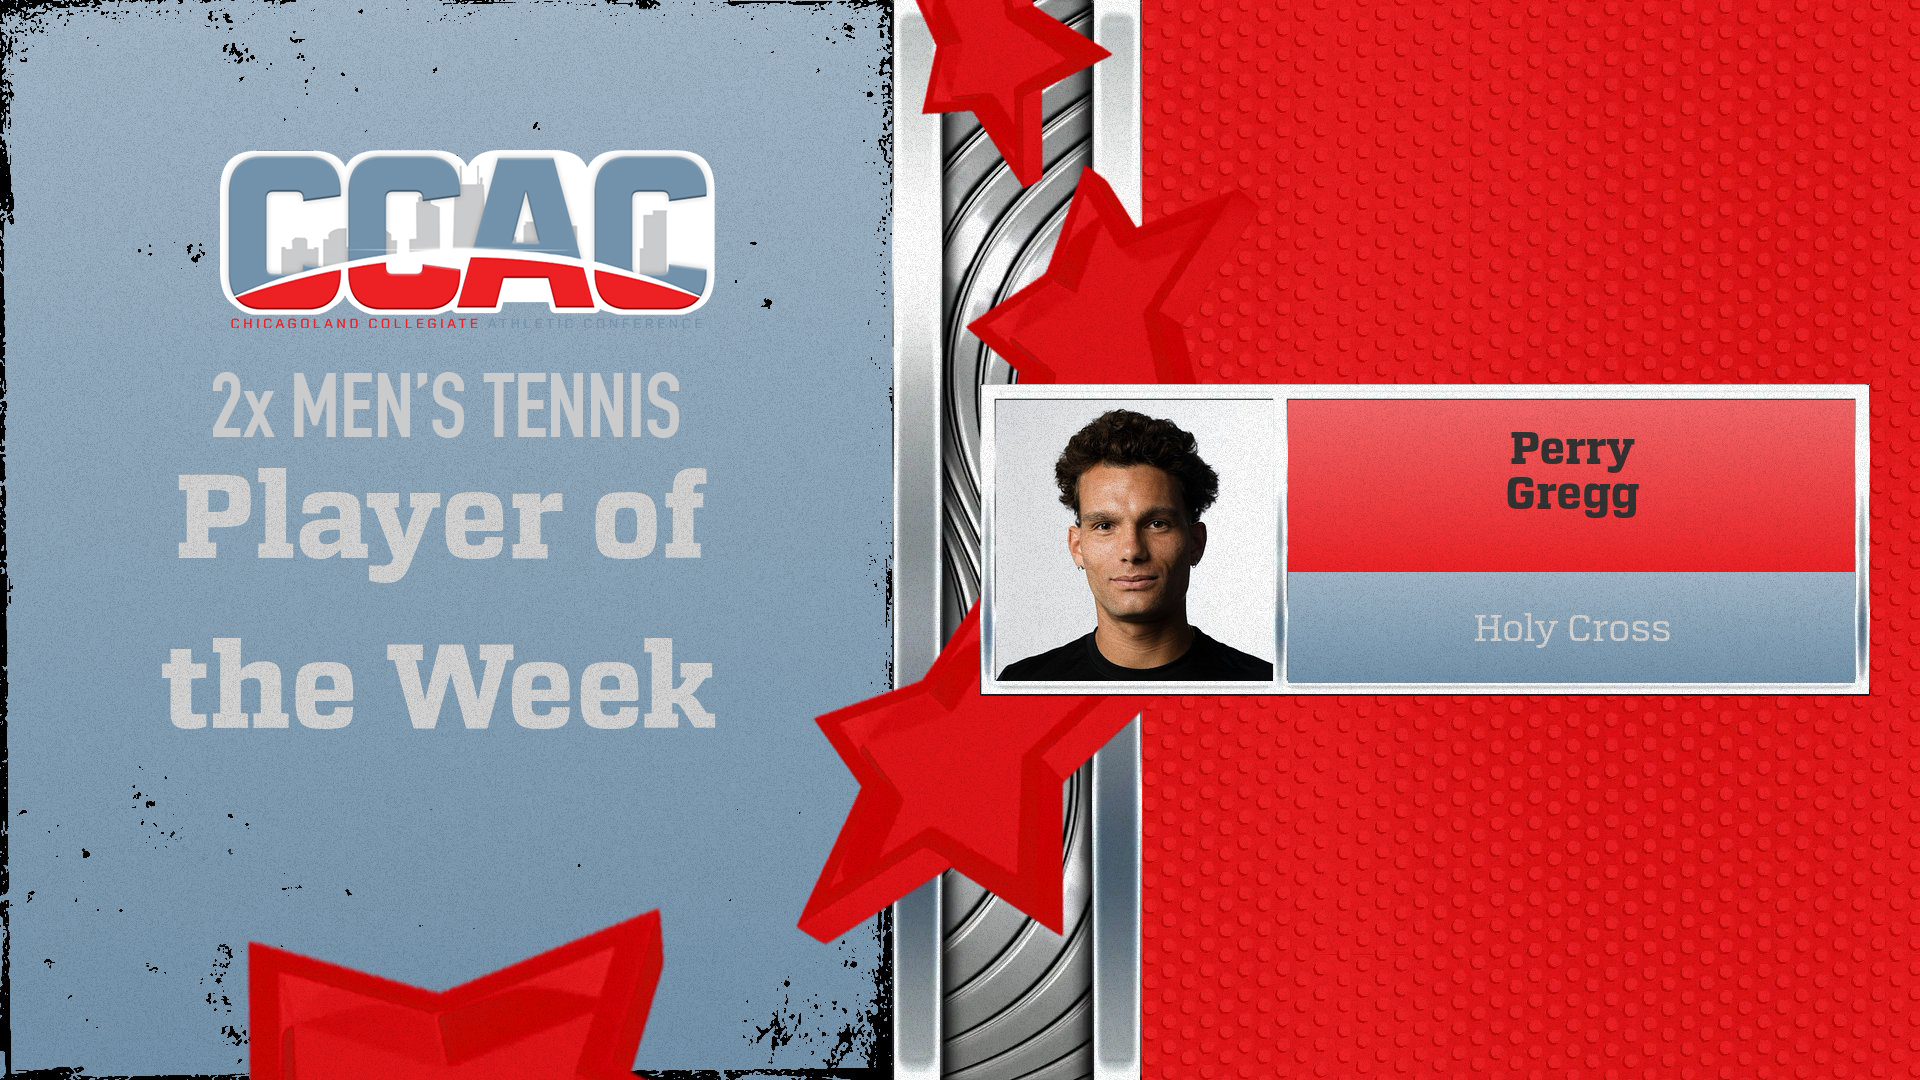 Holy Cross' Perry Earns Second Straight Men's Tennis Weekly Award